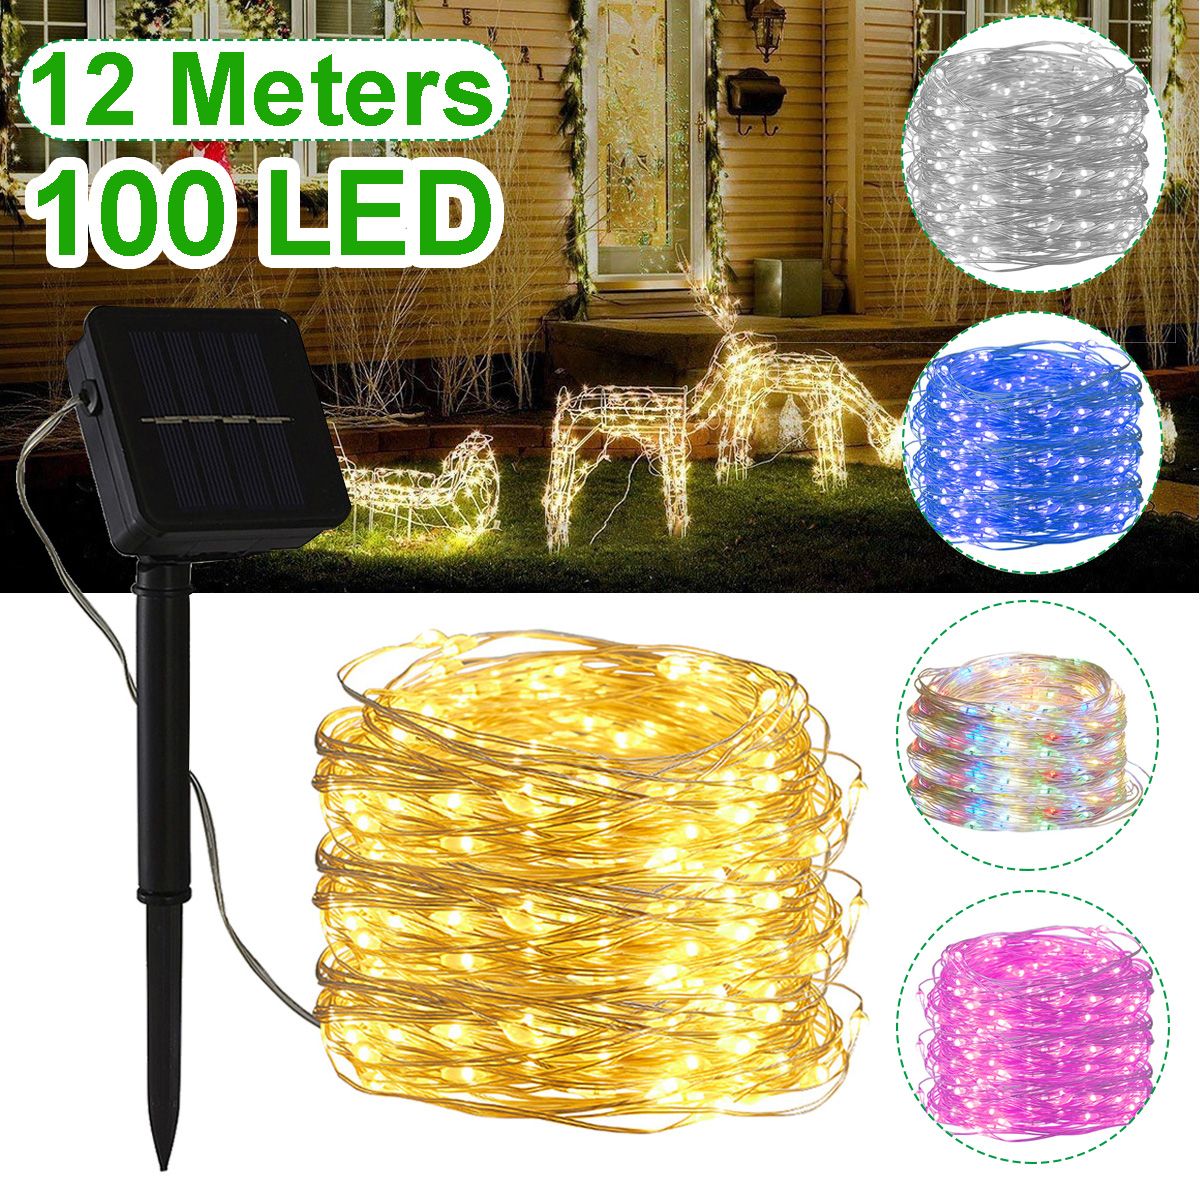 12M-100LED-Solar-String-Light-8-Modes-Waterproof-Copper-Wire-Fairy-Lamp-Outdoor-Garden-Party-Decor-1719693